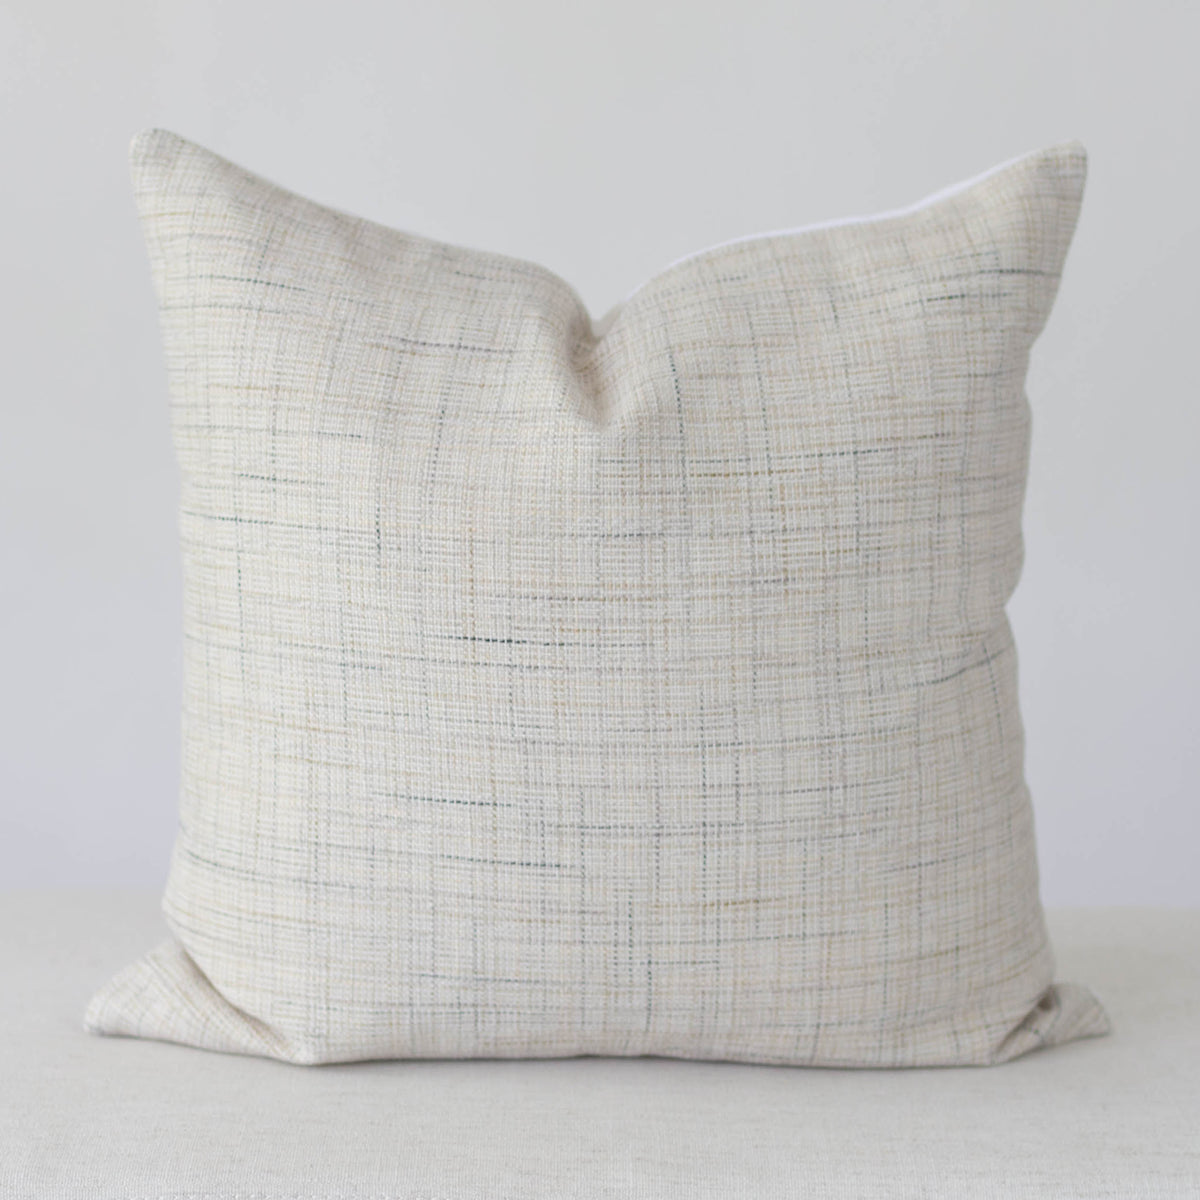 Beige and Cream Pillow Cover